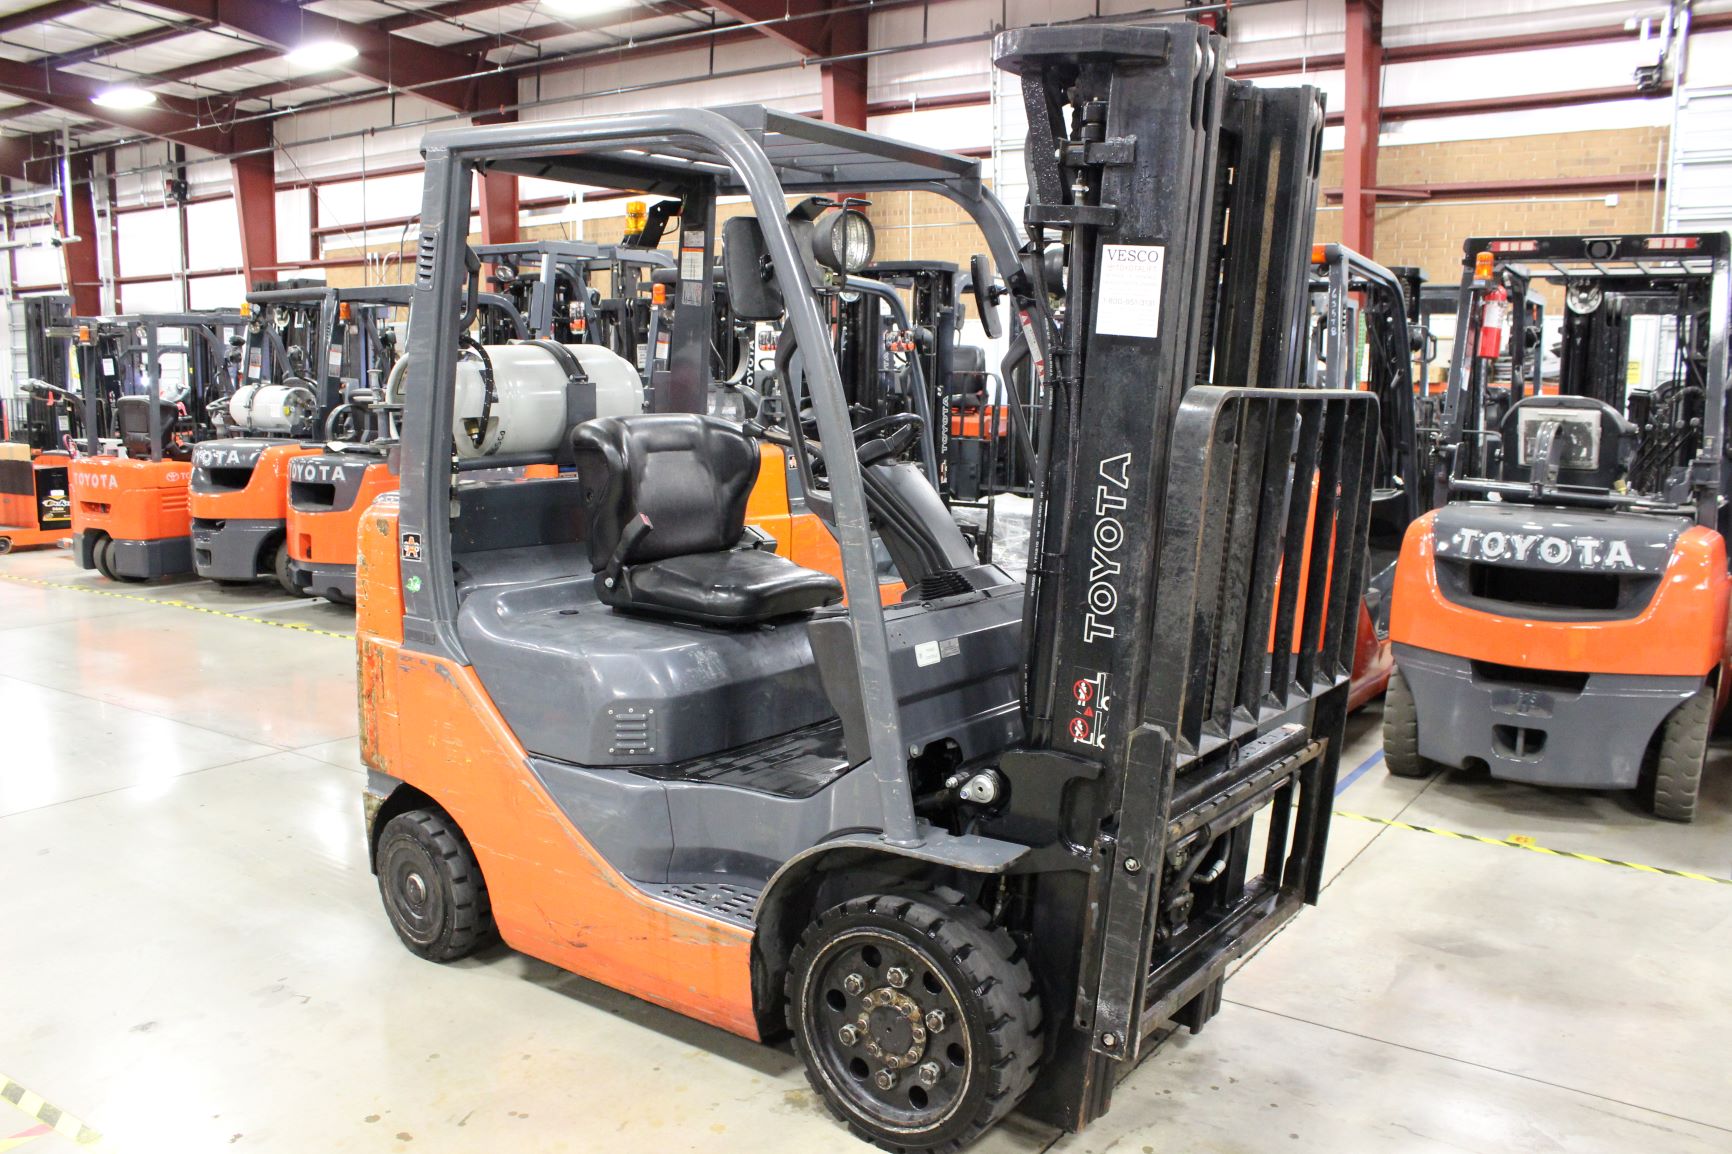 Used Forklifts In Statesville Asheville Hickory North Carolina Vesco Toyotalift